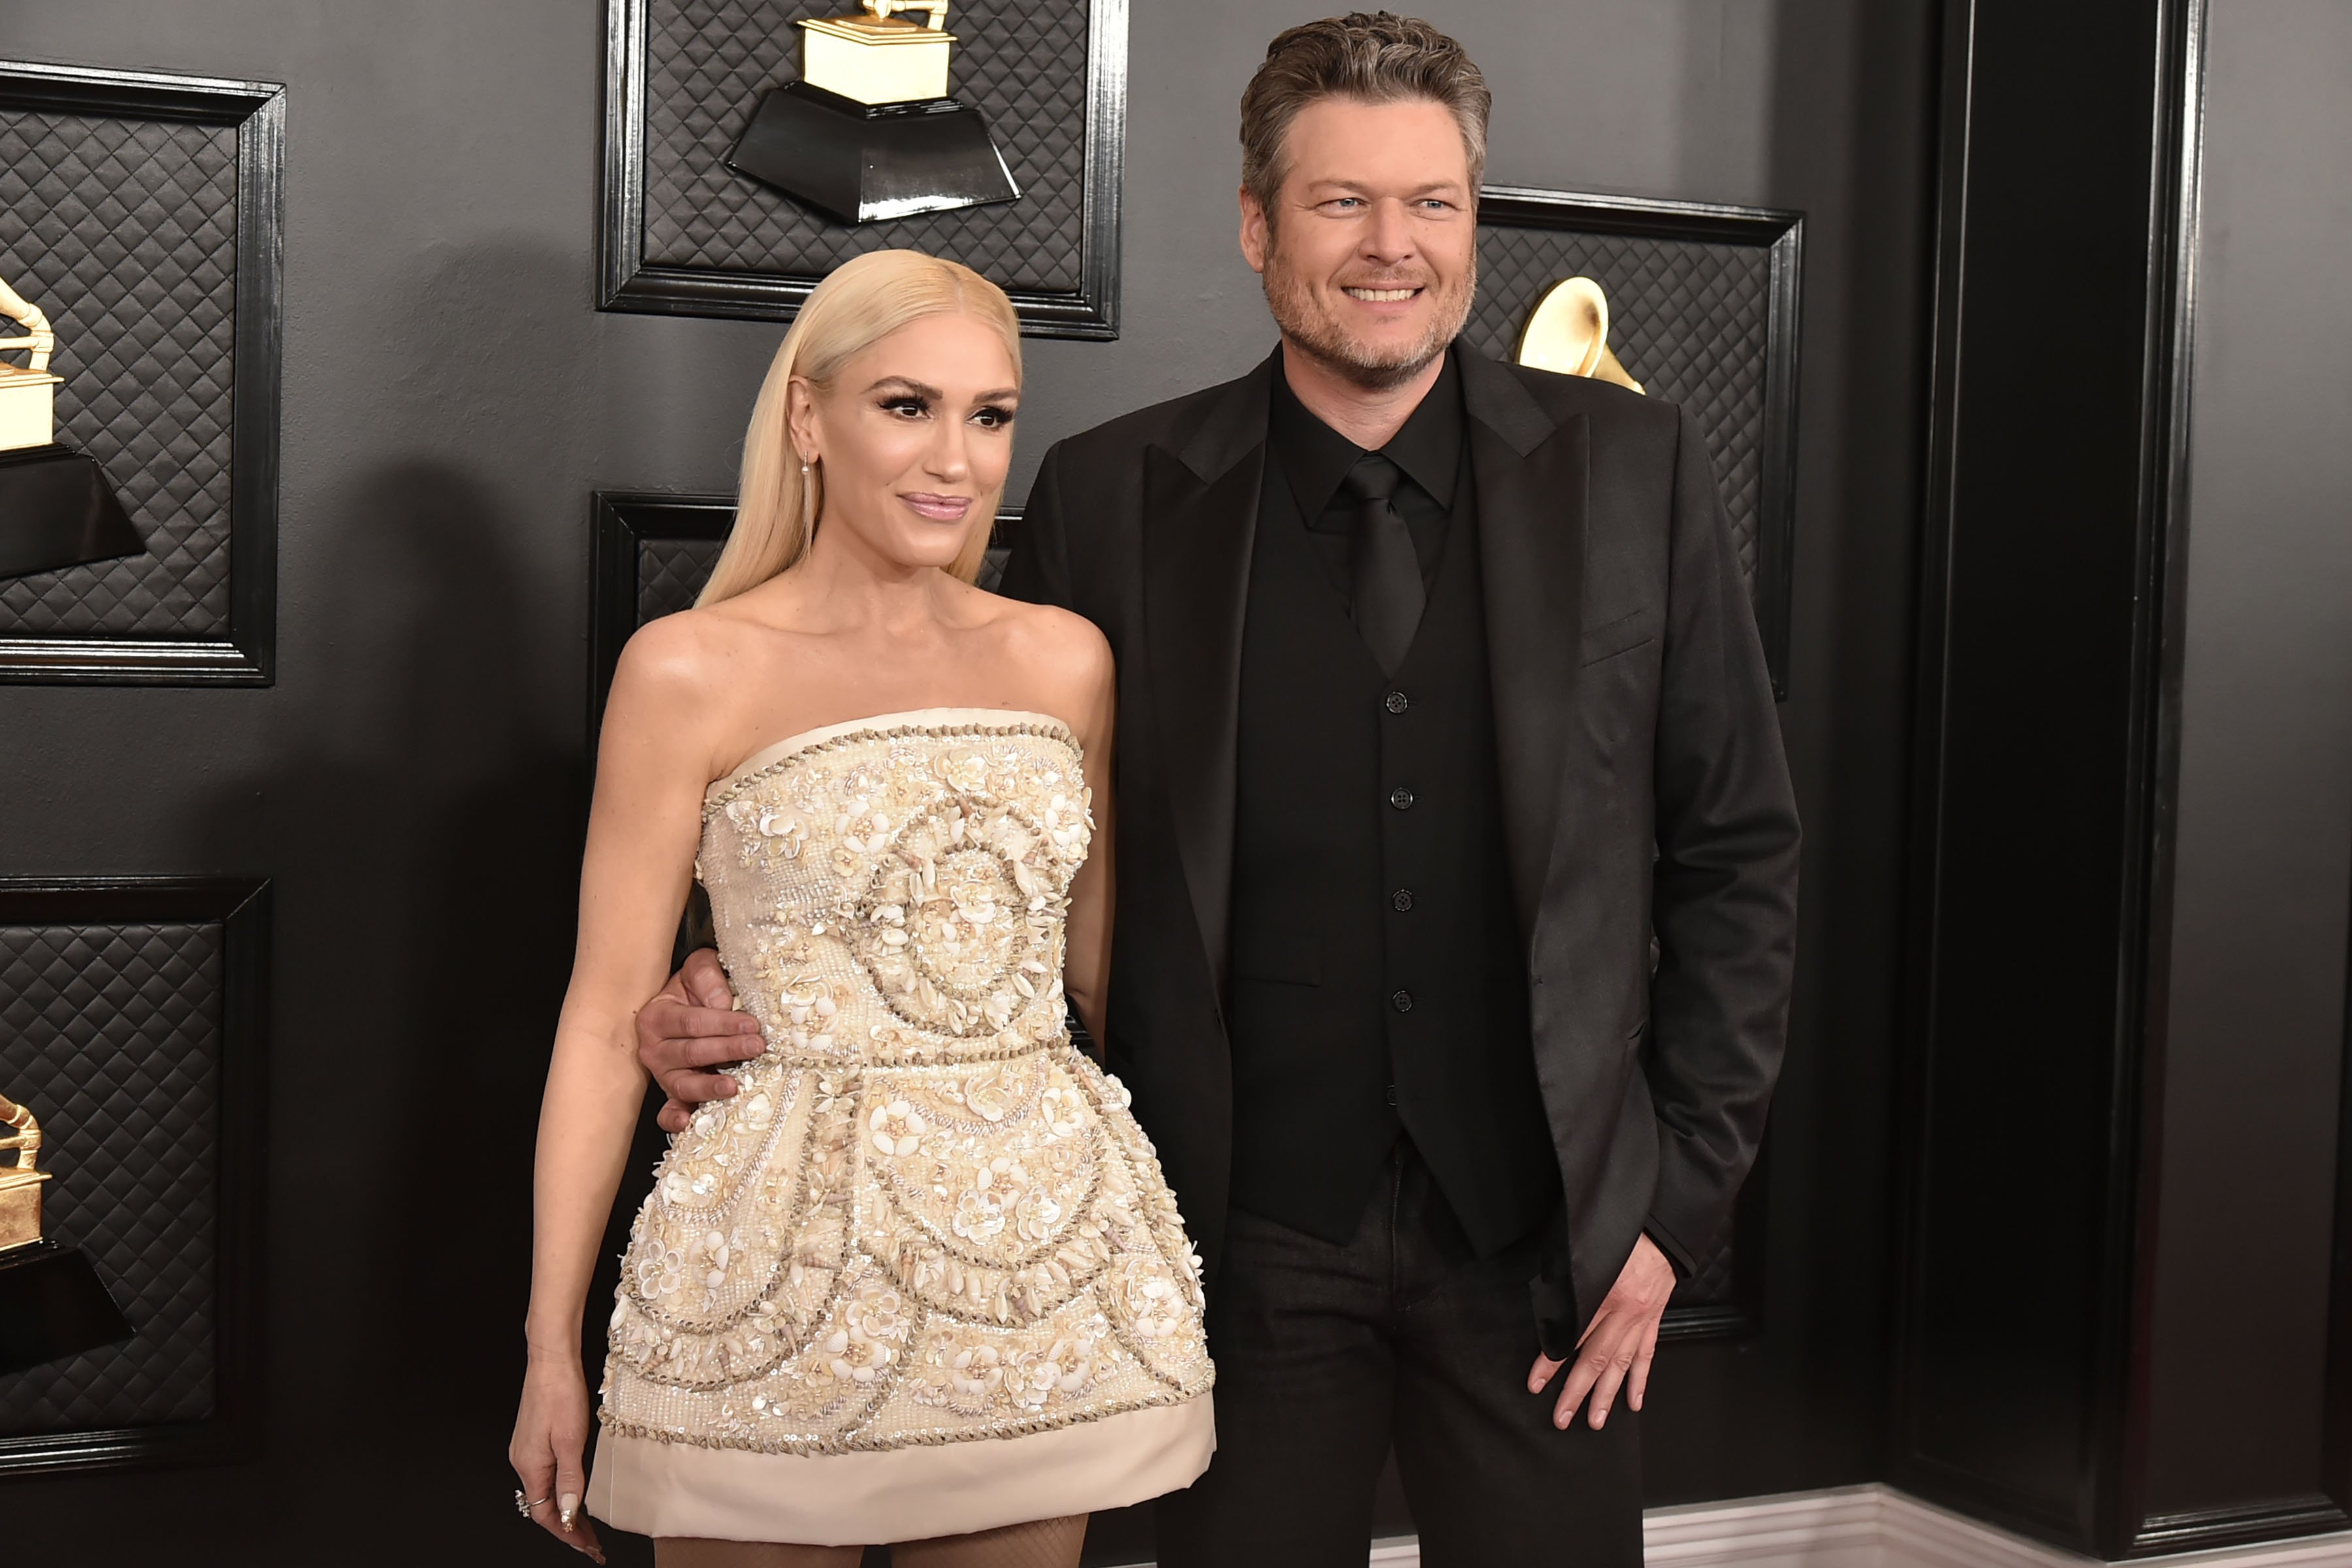 Gwen Stefani and Blake Shelton looking splendid, at the 2020 Grammy Awards in L.A., January, 2020. | Photo: Getty Images.